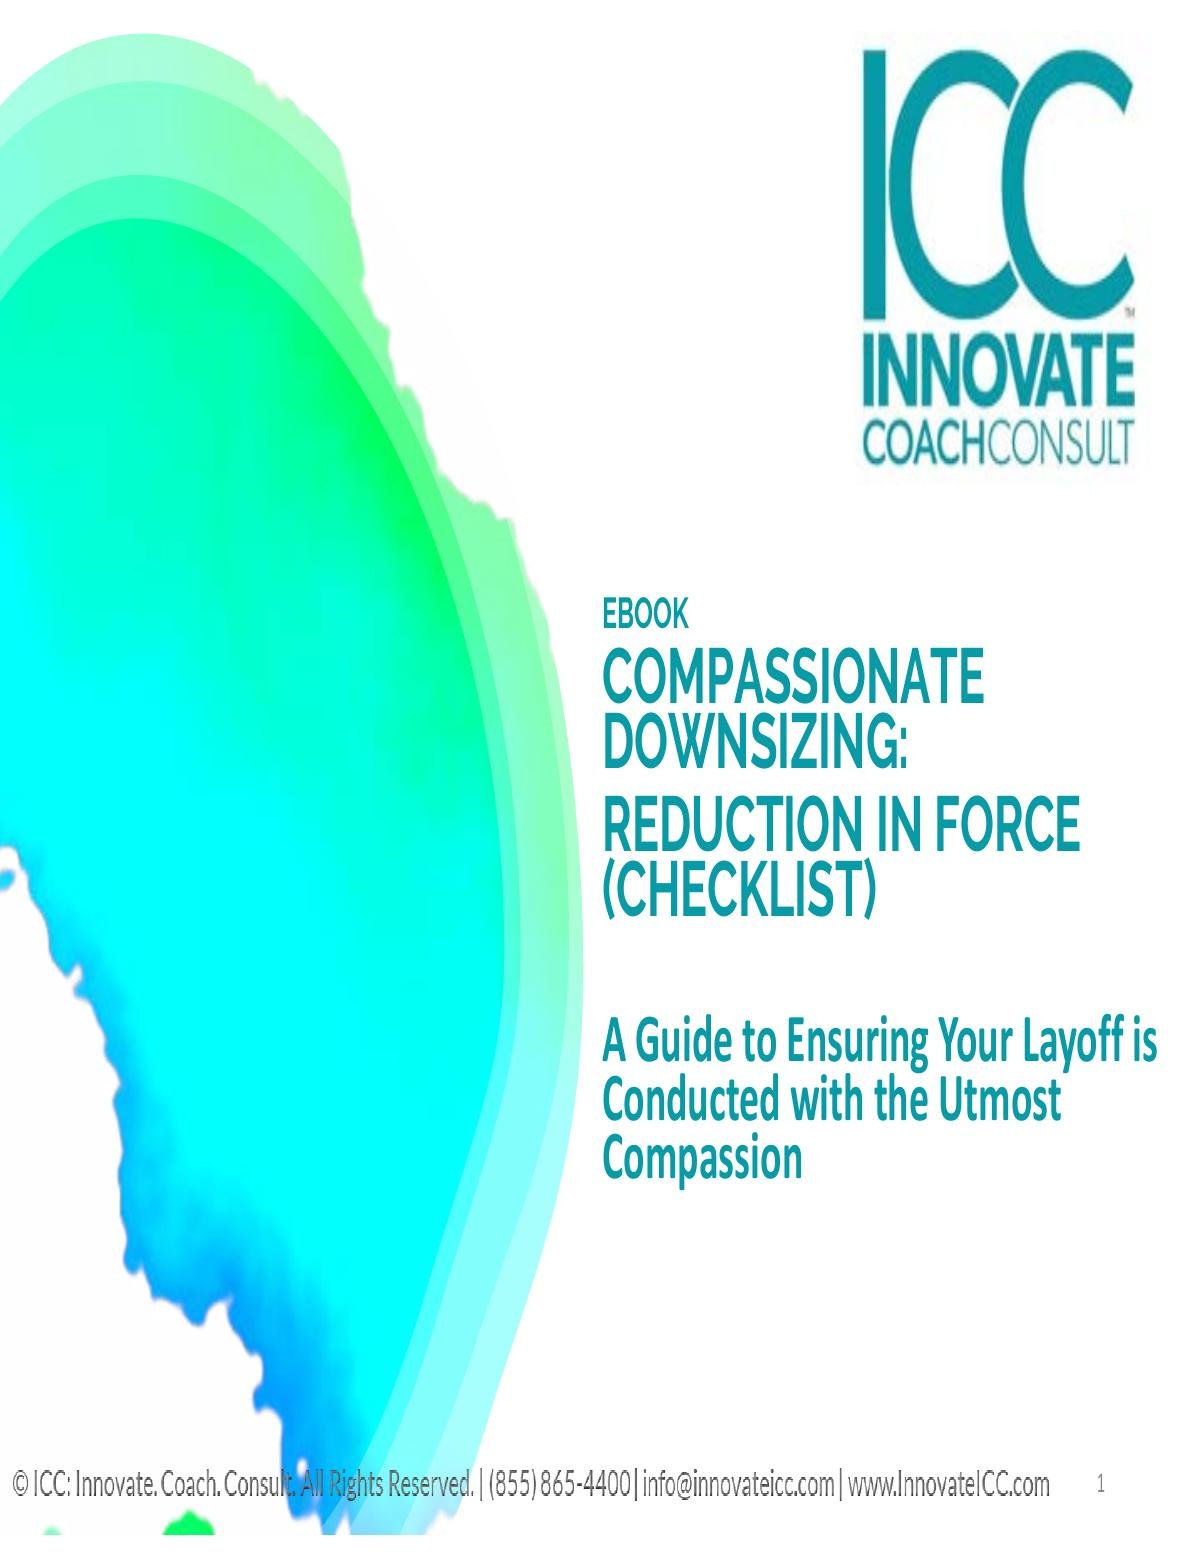 COMPASSIONATE DOWNSIZING: REDUCTION IN FORCE (CHECKLIST)